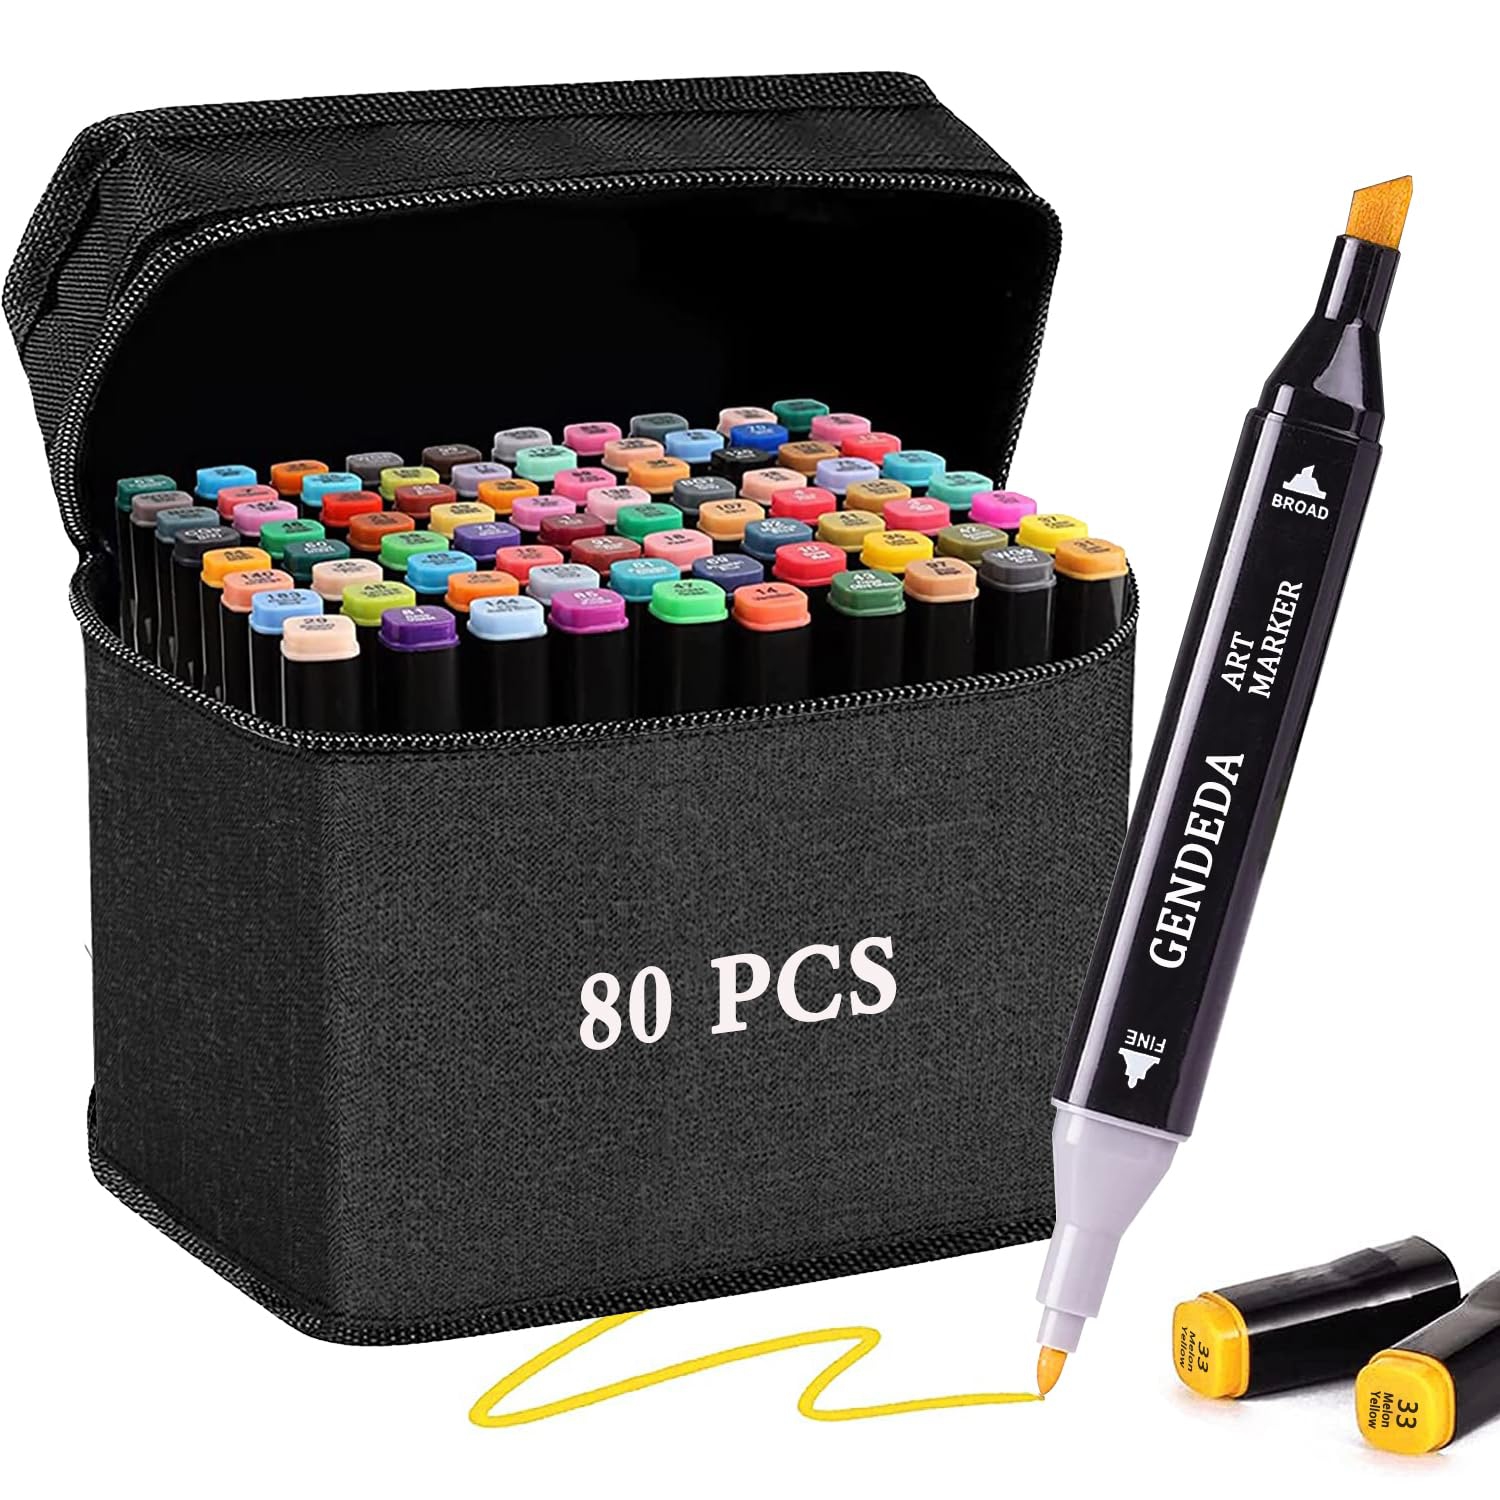 Colorful Creations: 80 Dual Tip Alcohol Markers Set for Artists, Kids, and Adults - Permanent, Brush and Chisel Tip - Ideal for Coloring, Drawing, Sketching - Includes Case